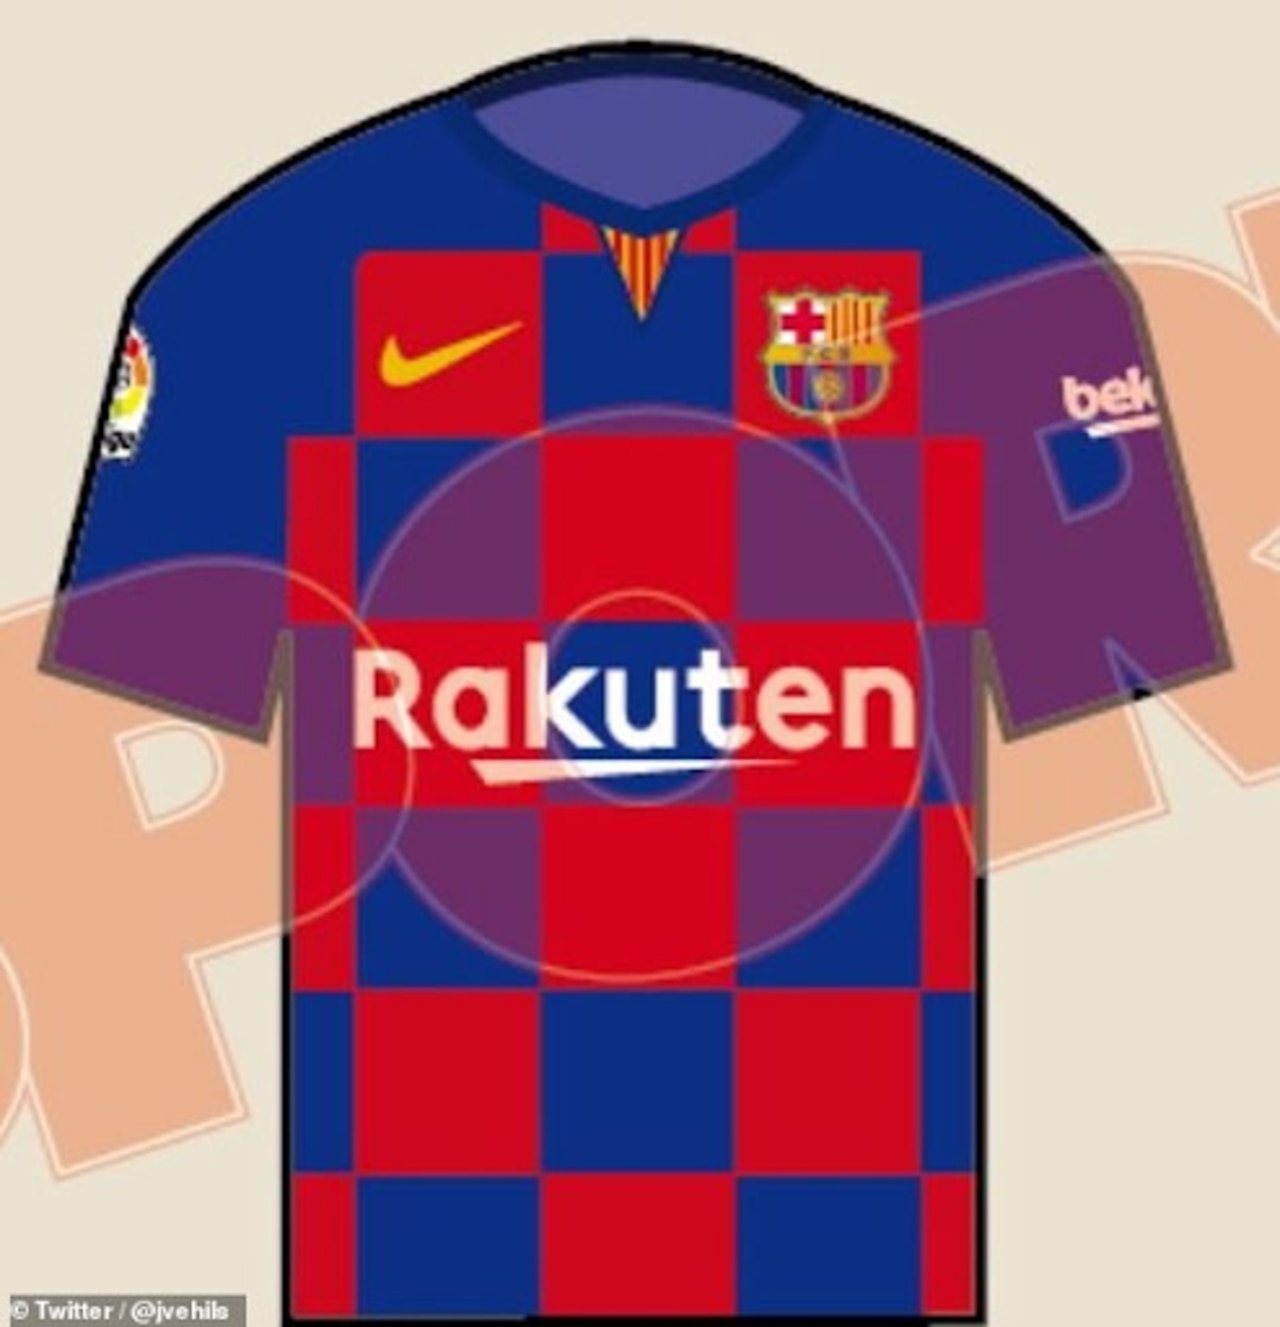 Bacelona's new kit is an interesting one...